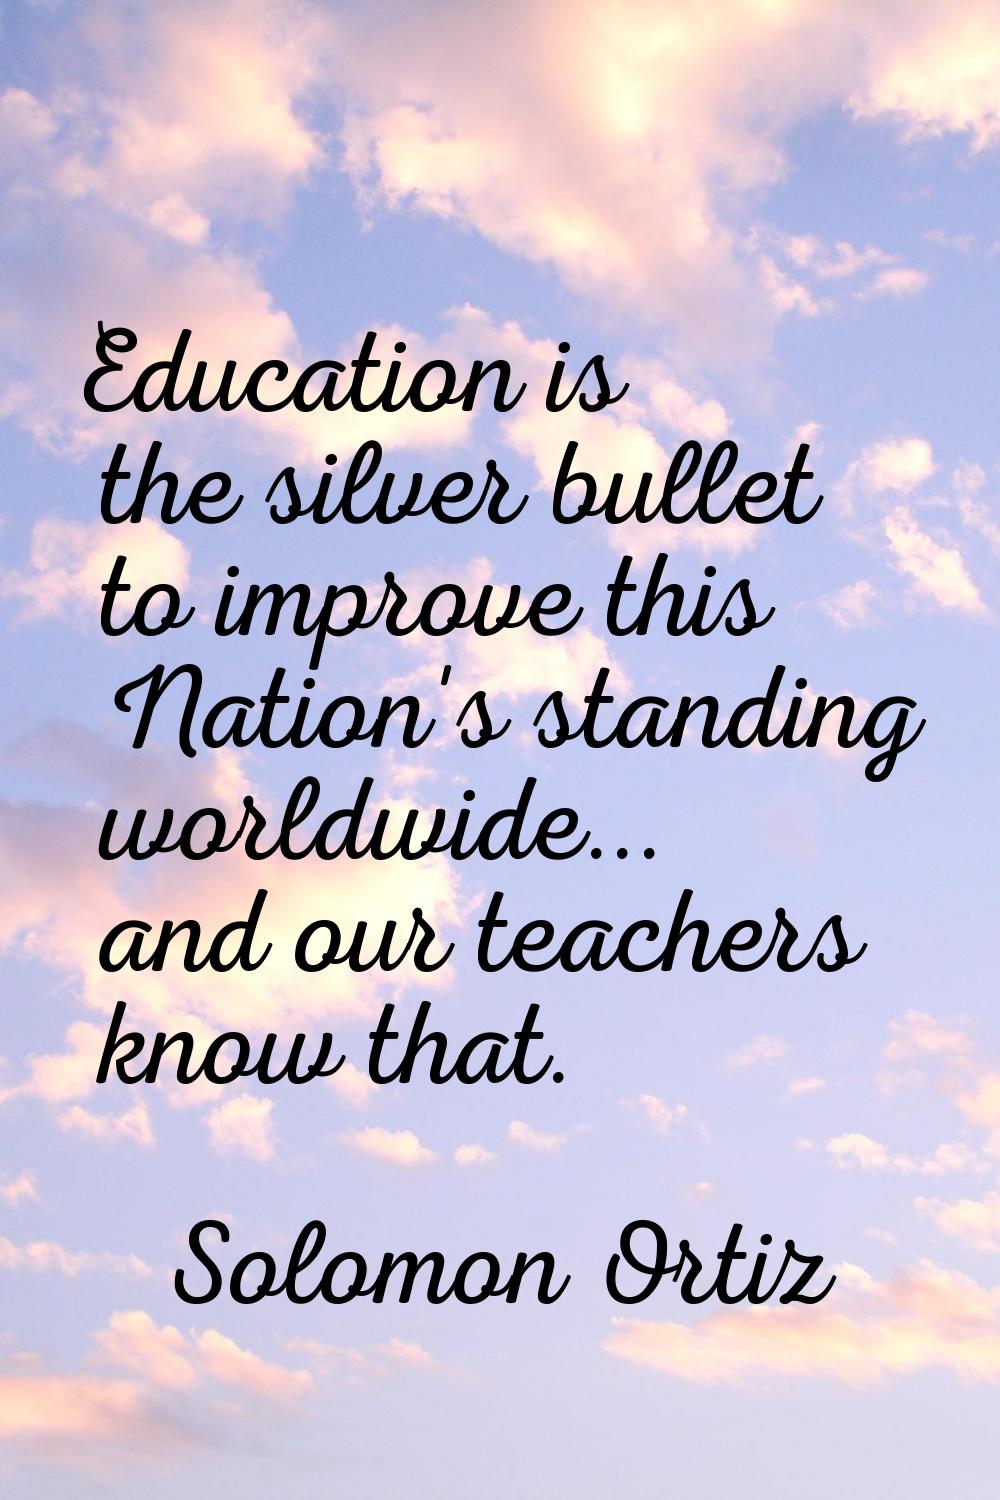 Education is the silver bullet to improve this Nation's standing worldwide... and our teachers know